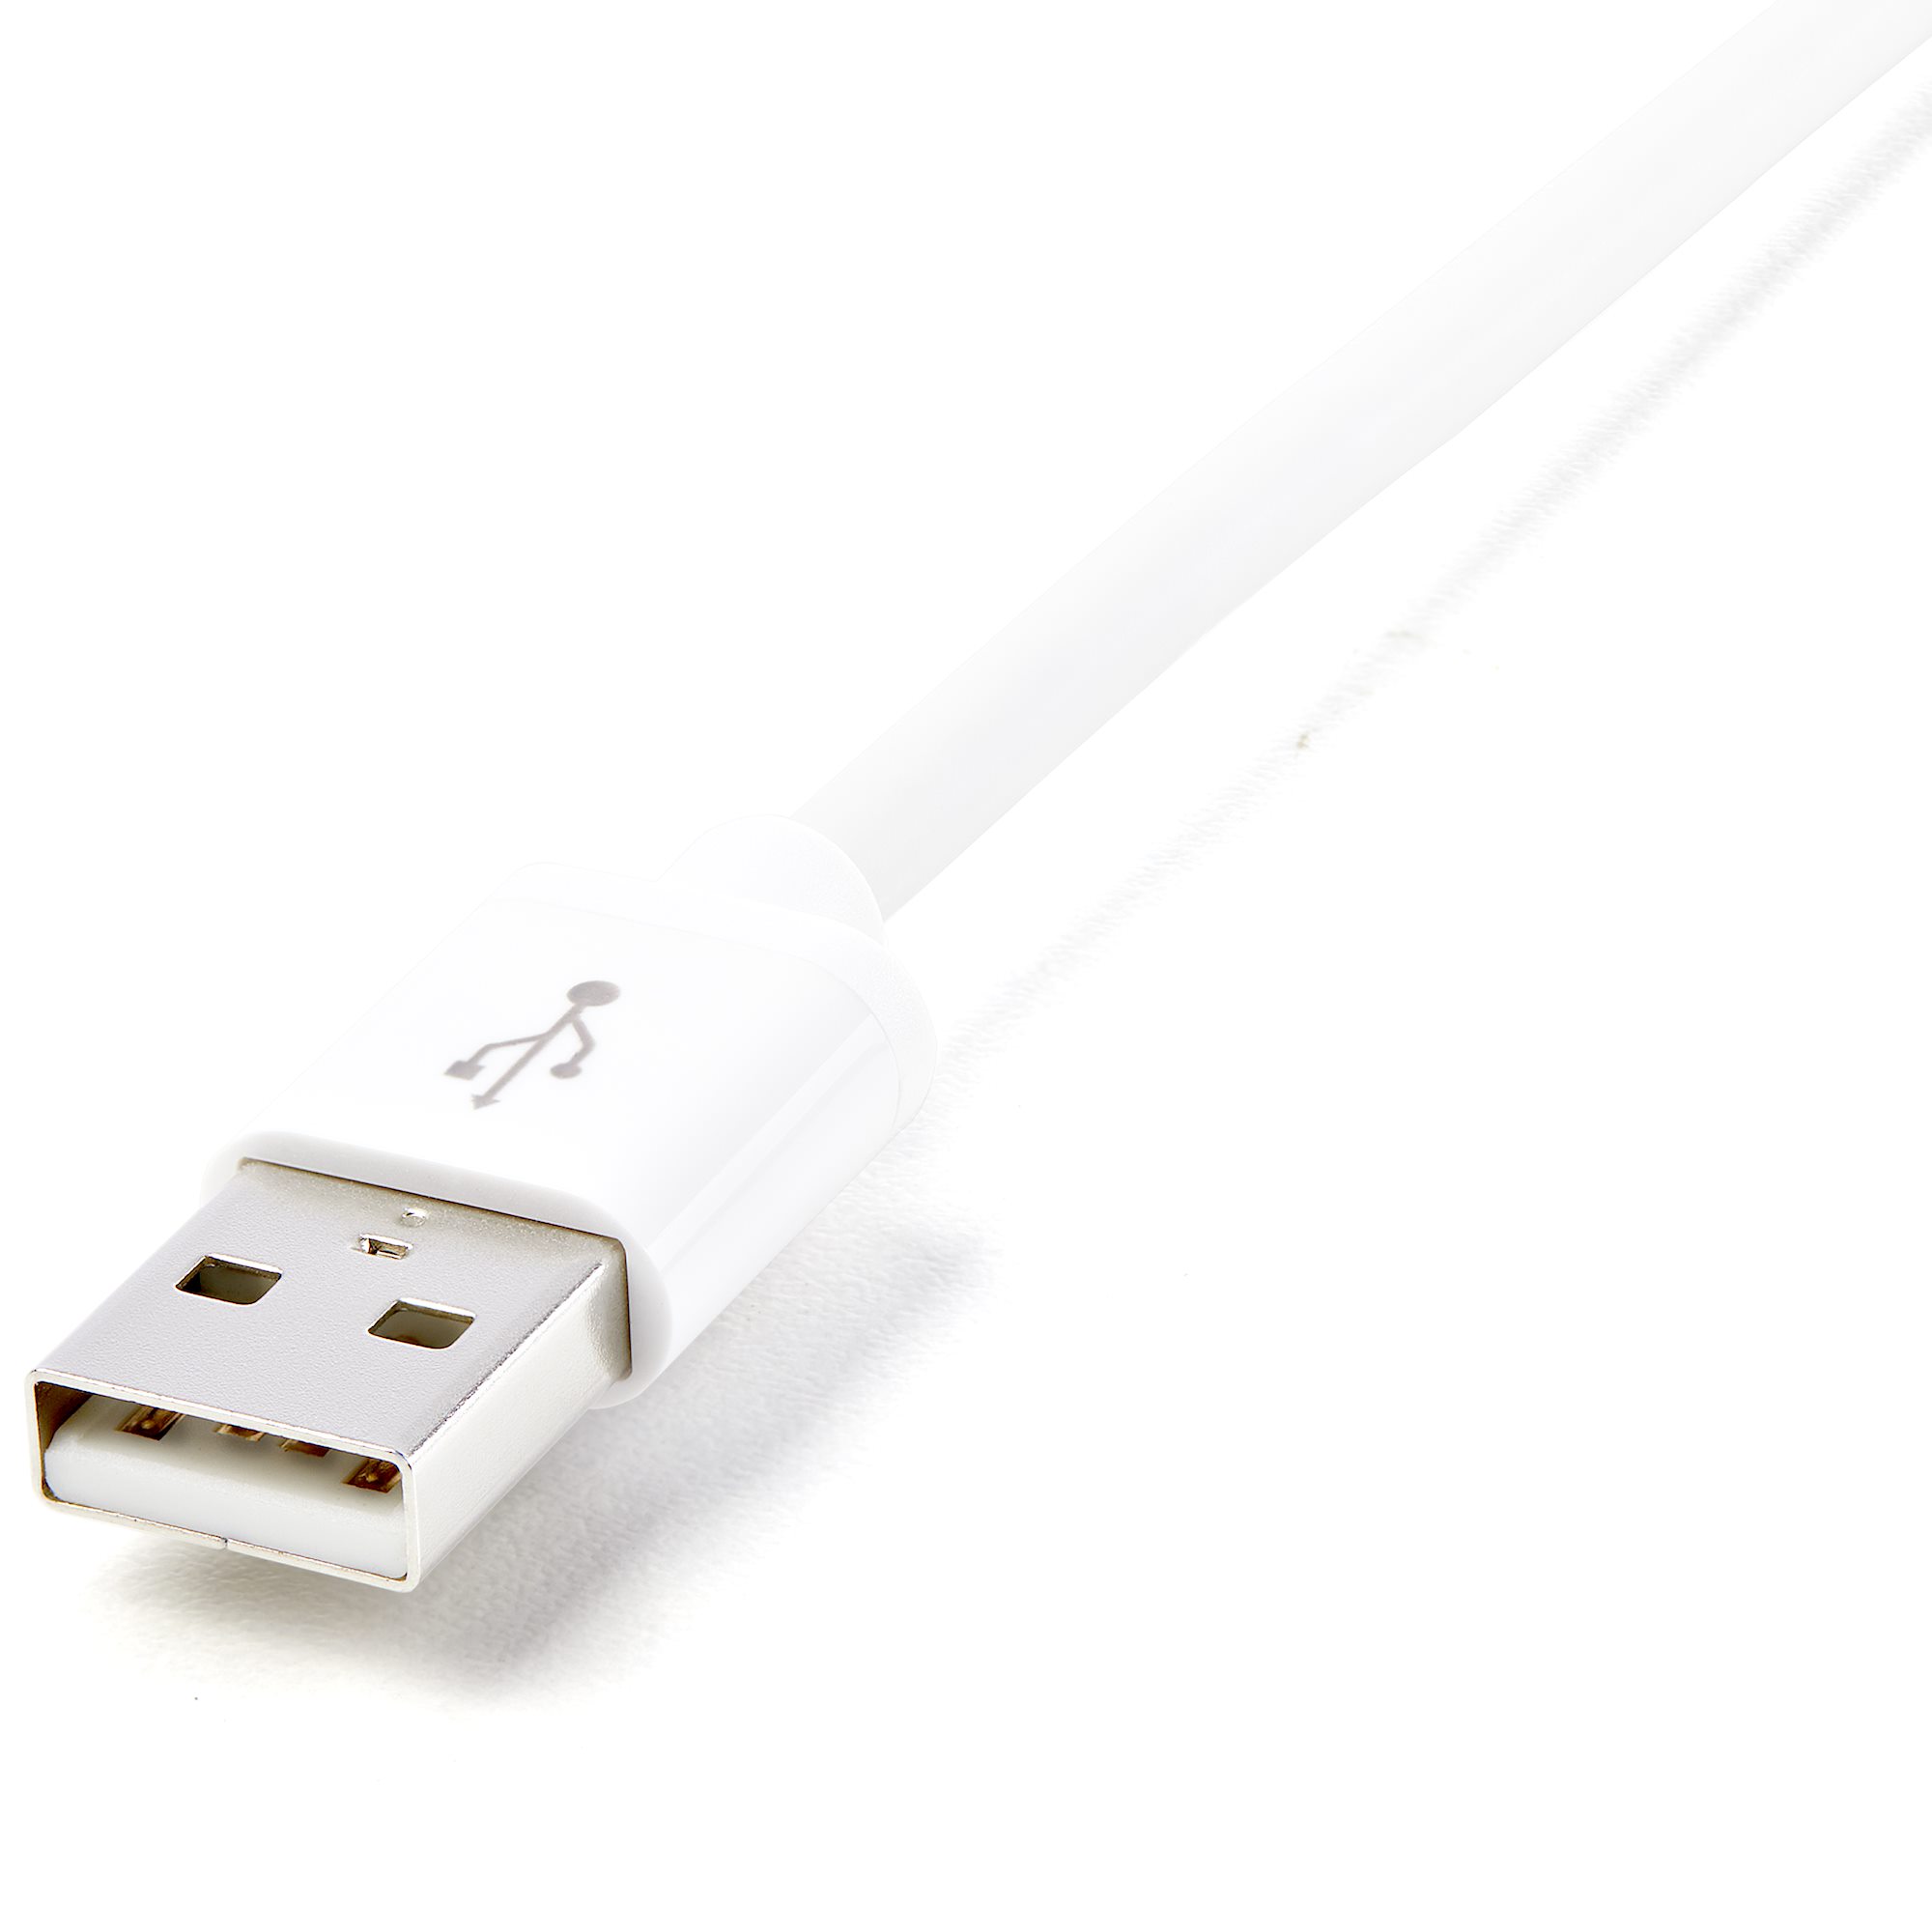 1m White 8-pin Lightning to USB Cable - Lightning Cables, Cables